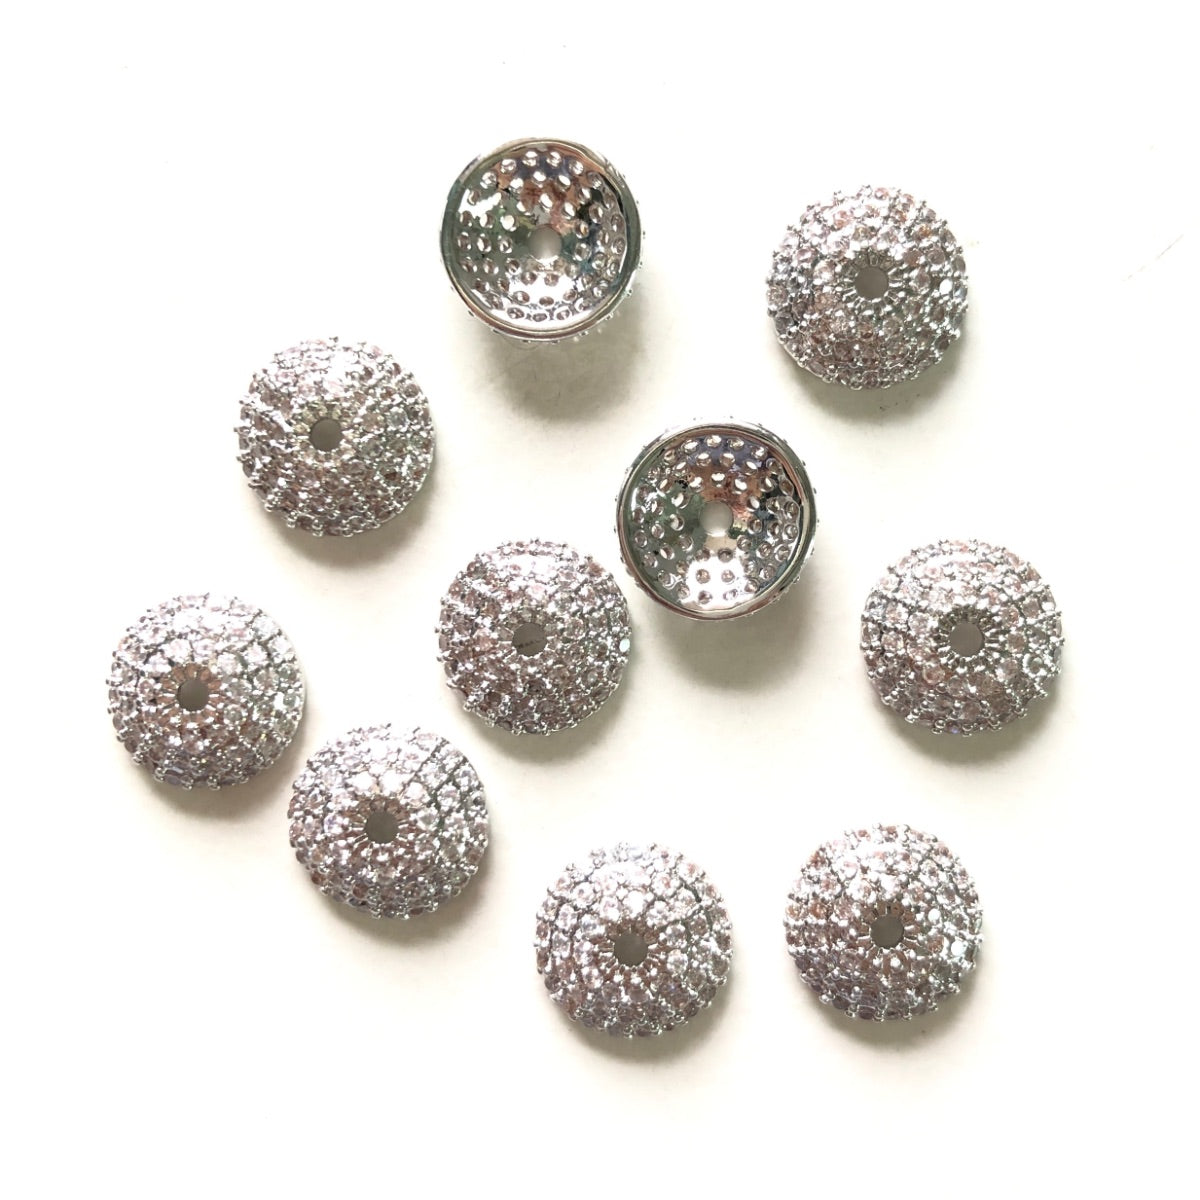 20pcs/lot 8/10/11mm Half Round CZ Paved Beads Caps Spacers Silver CZ Paved Spacers Beads Caps New Spacers Arrivals Charms Beads Beyond